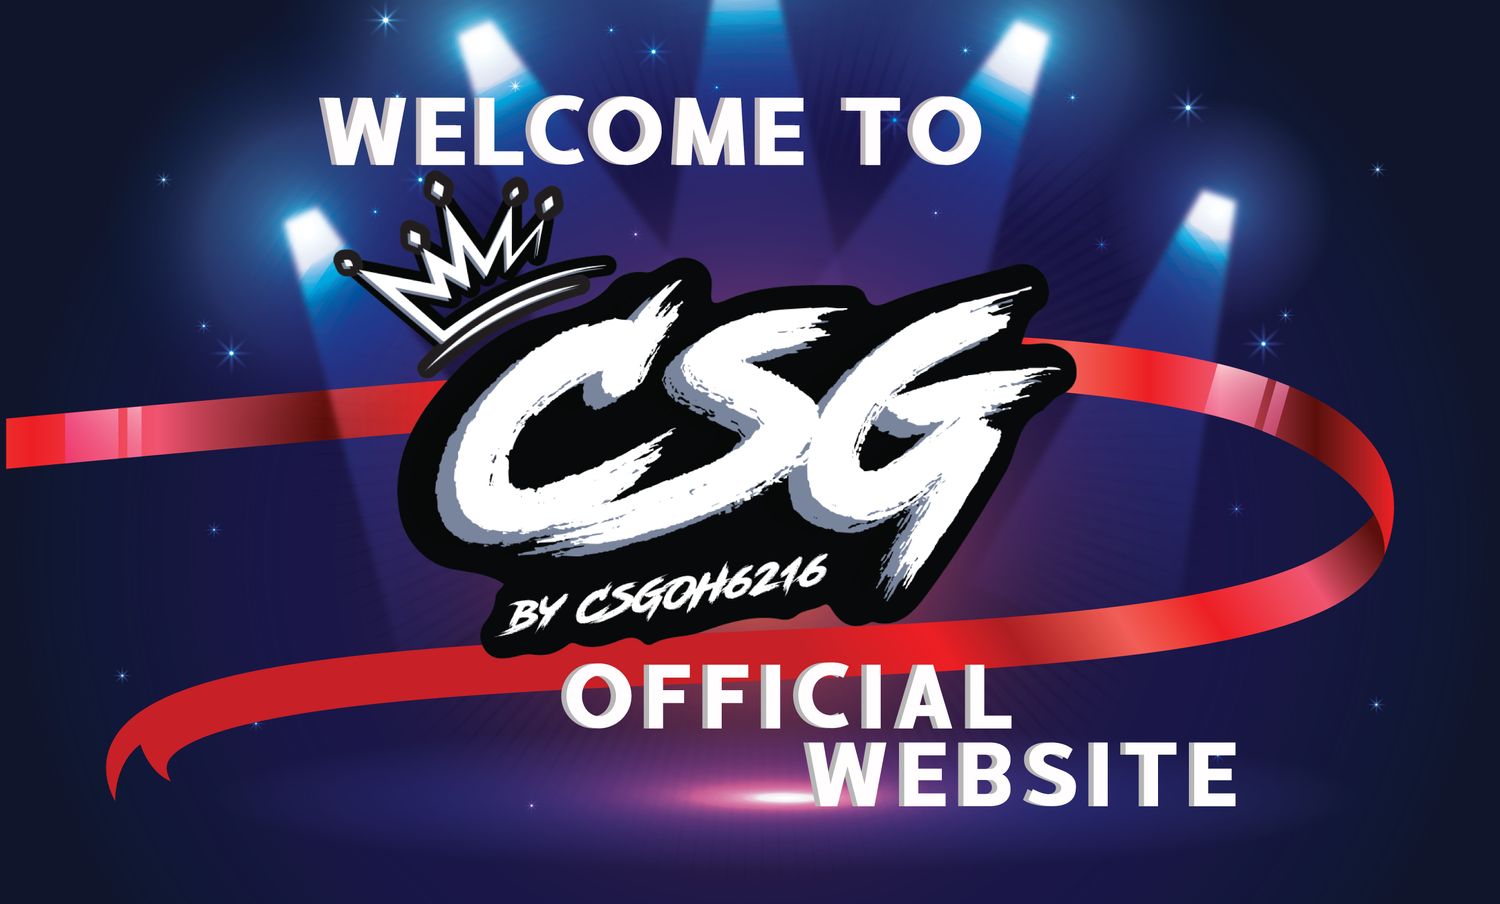 Csgoh6216 - Best Vape Online Store in Malaysia | 